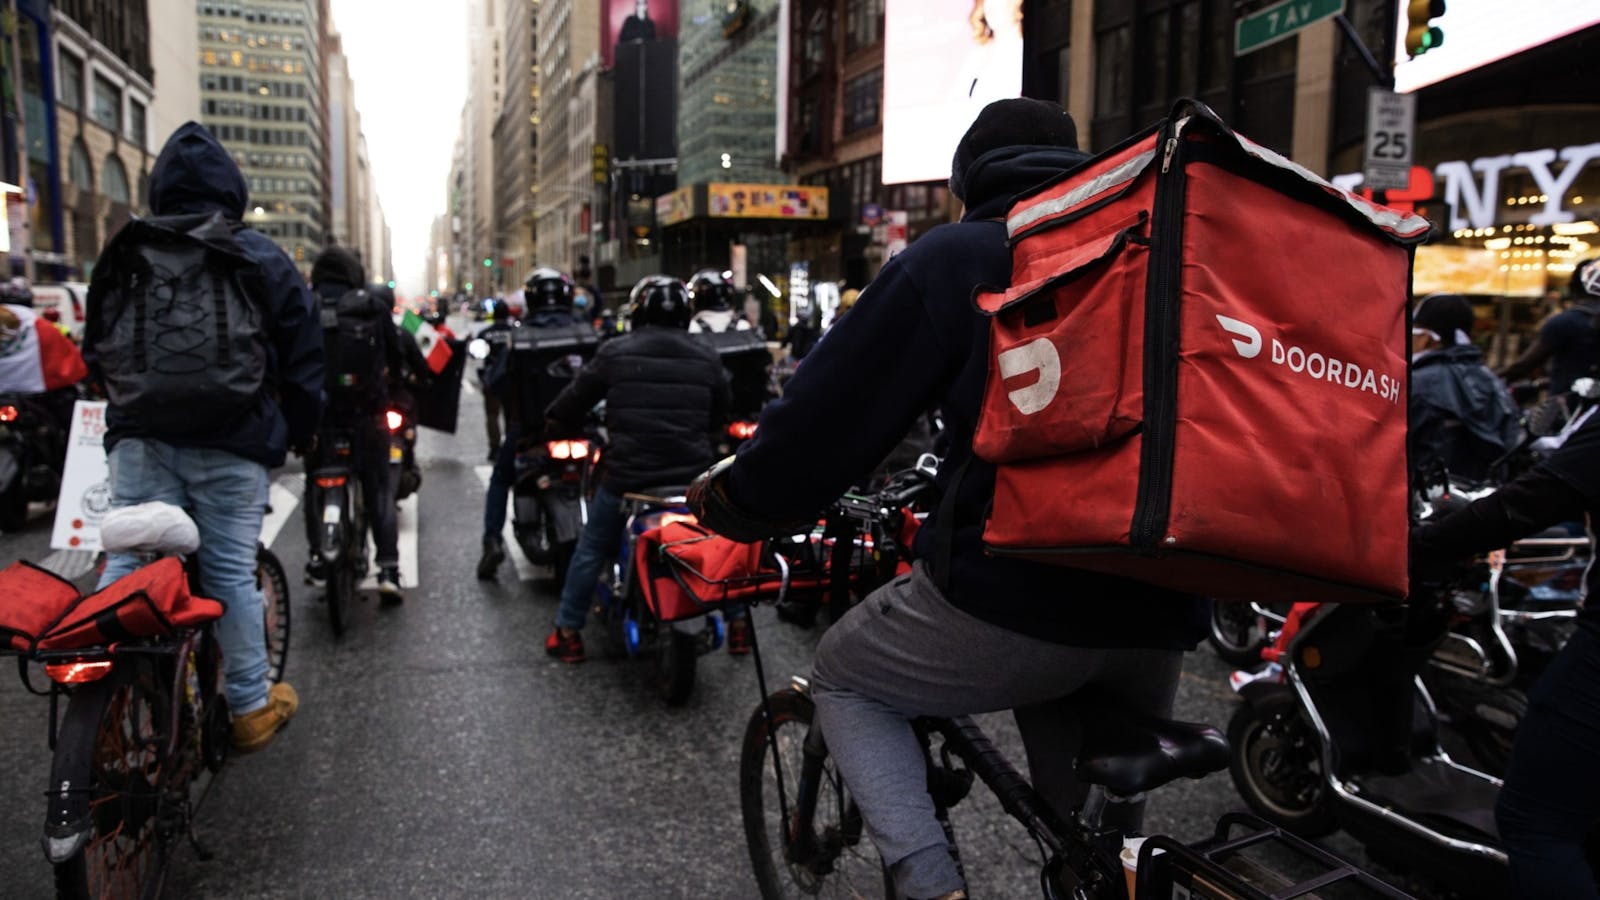 DoorDash riders in New York in April. Photo by Bloomberg.